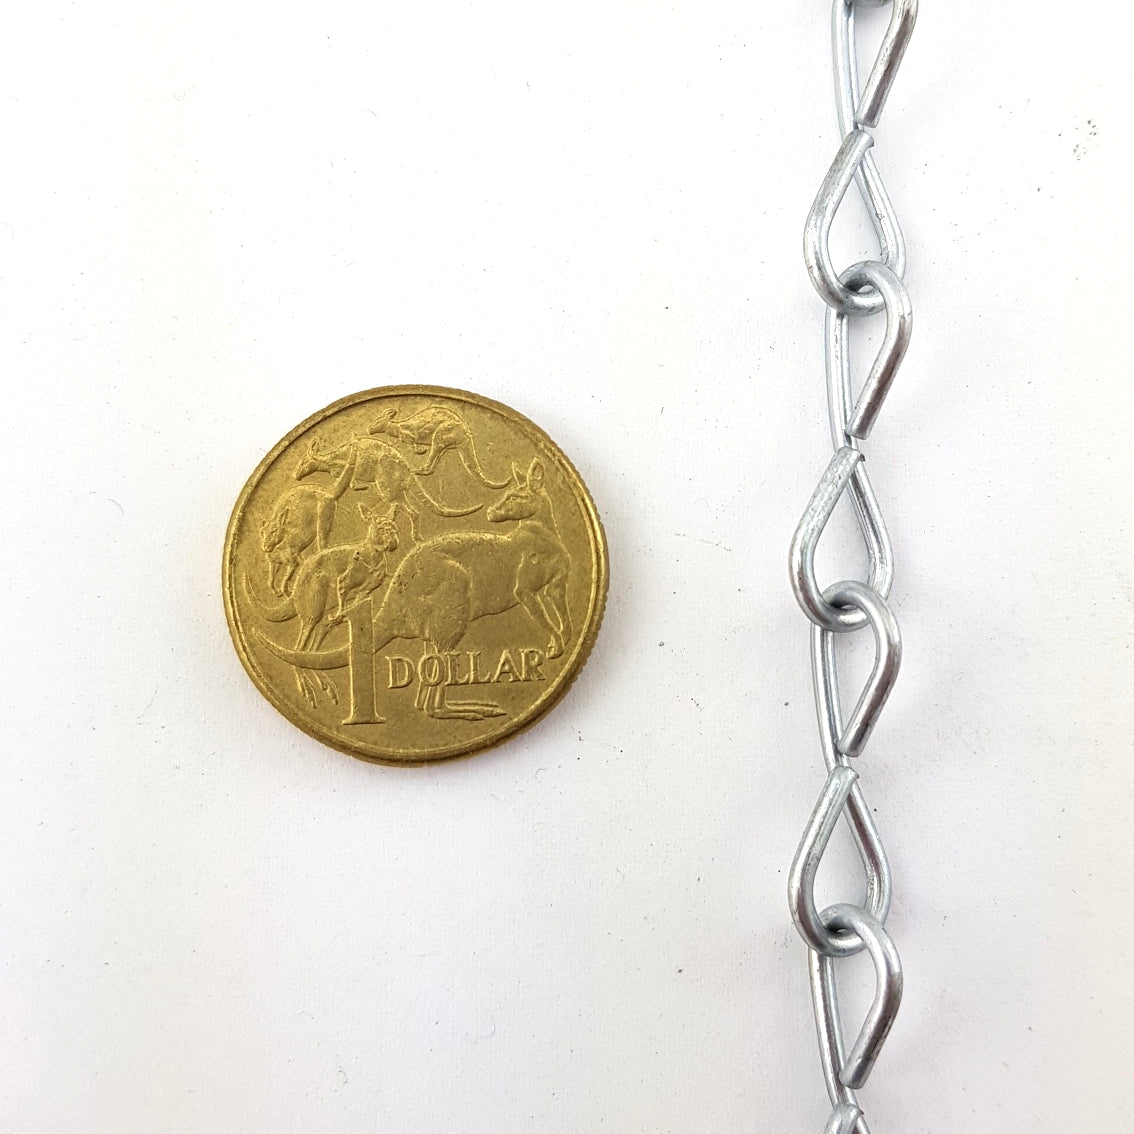 Australian made Single Jack Chain in galvanised finish, size 1.6mm and quantity of 50 metres. Melbourne, Australia.